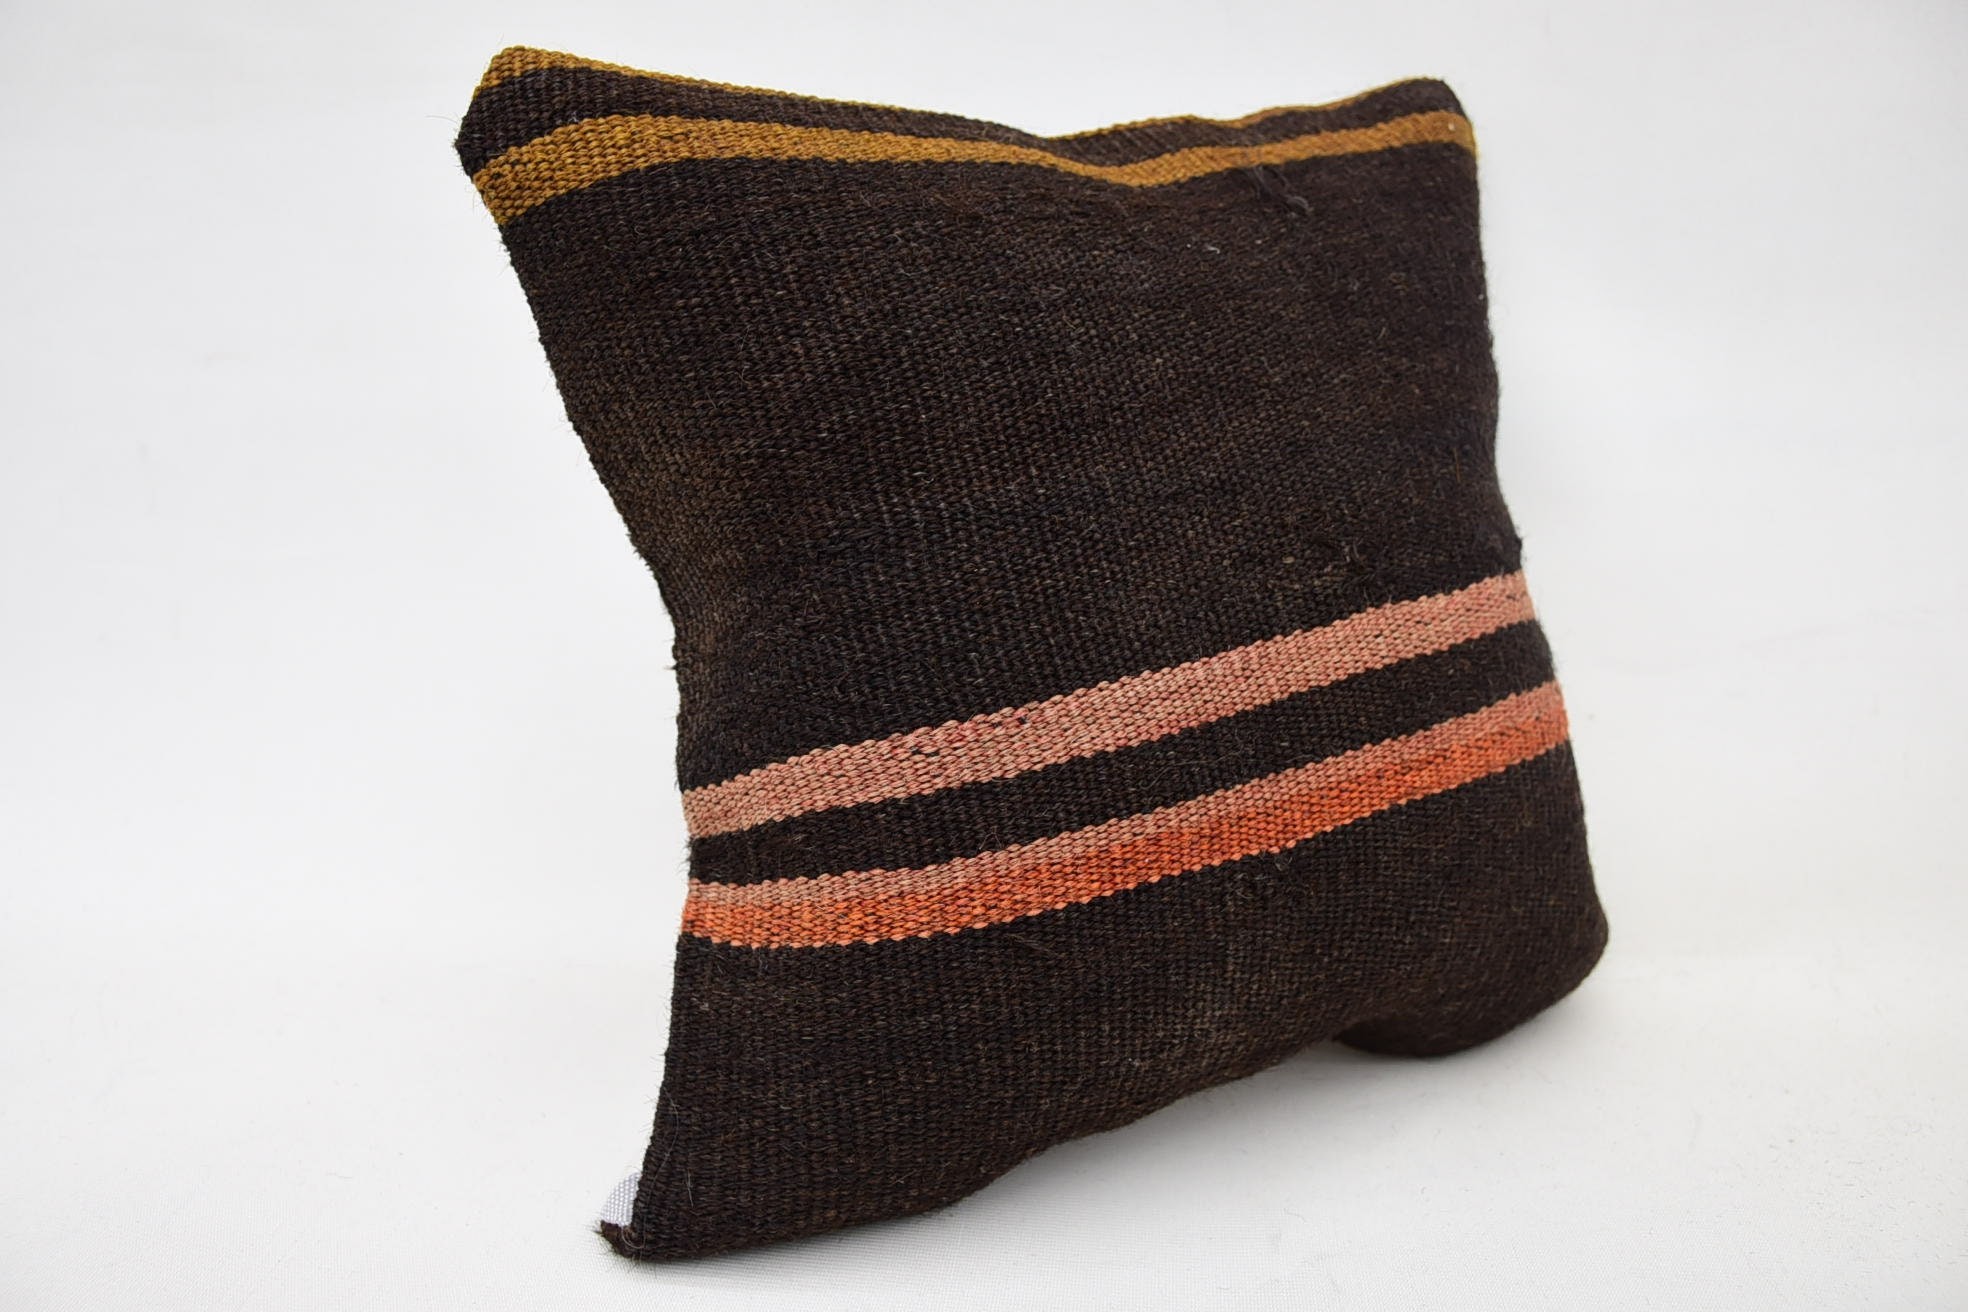 Outdoor Throw Pillow, Handmade Kilim Cushion, Turkish Kilim Pillow, Colorful Cushion Cover, 14"x14" Brown Pillow Case, Pillow for Couch